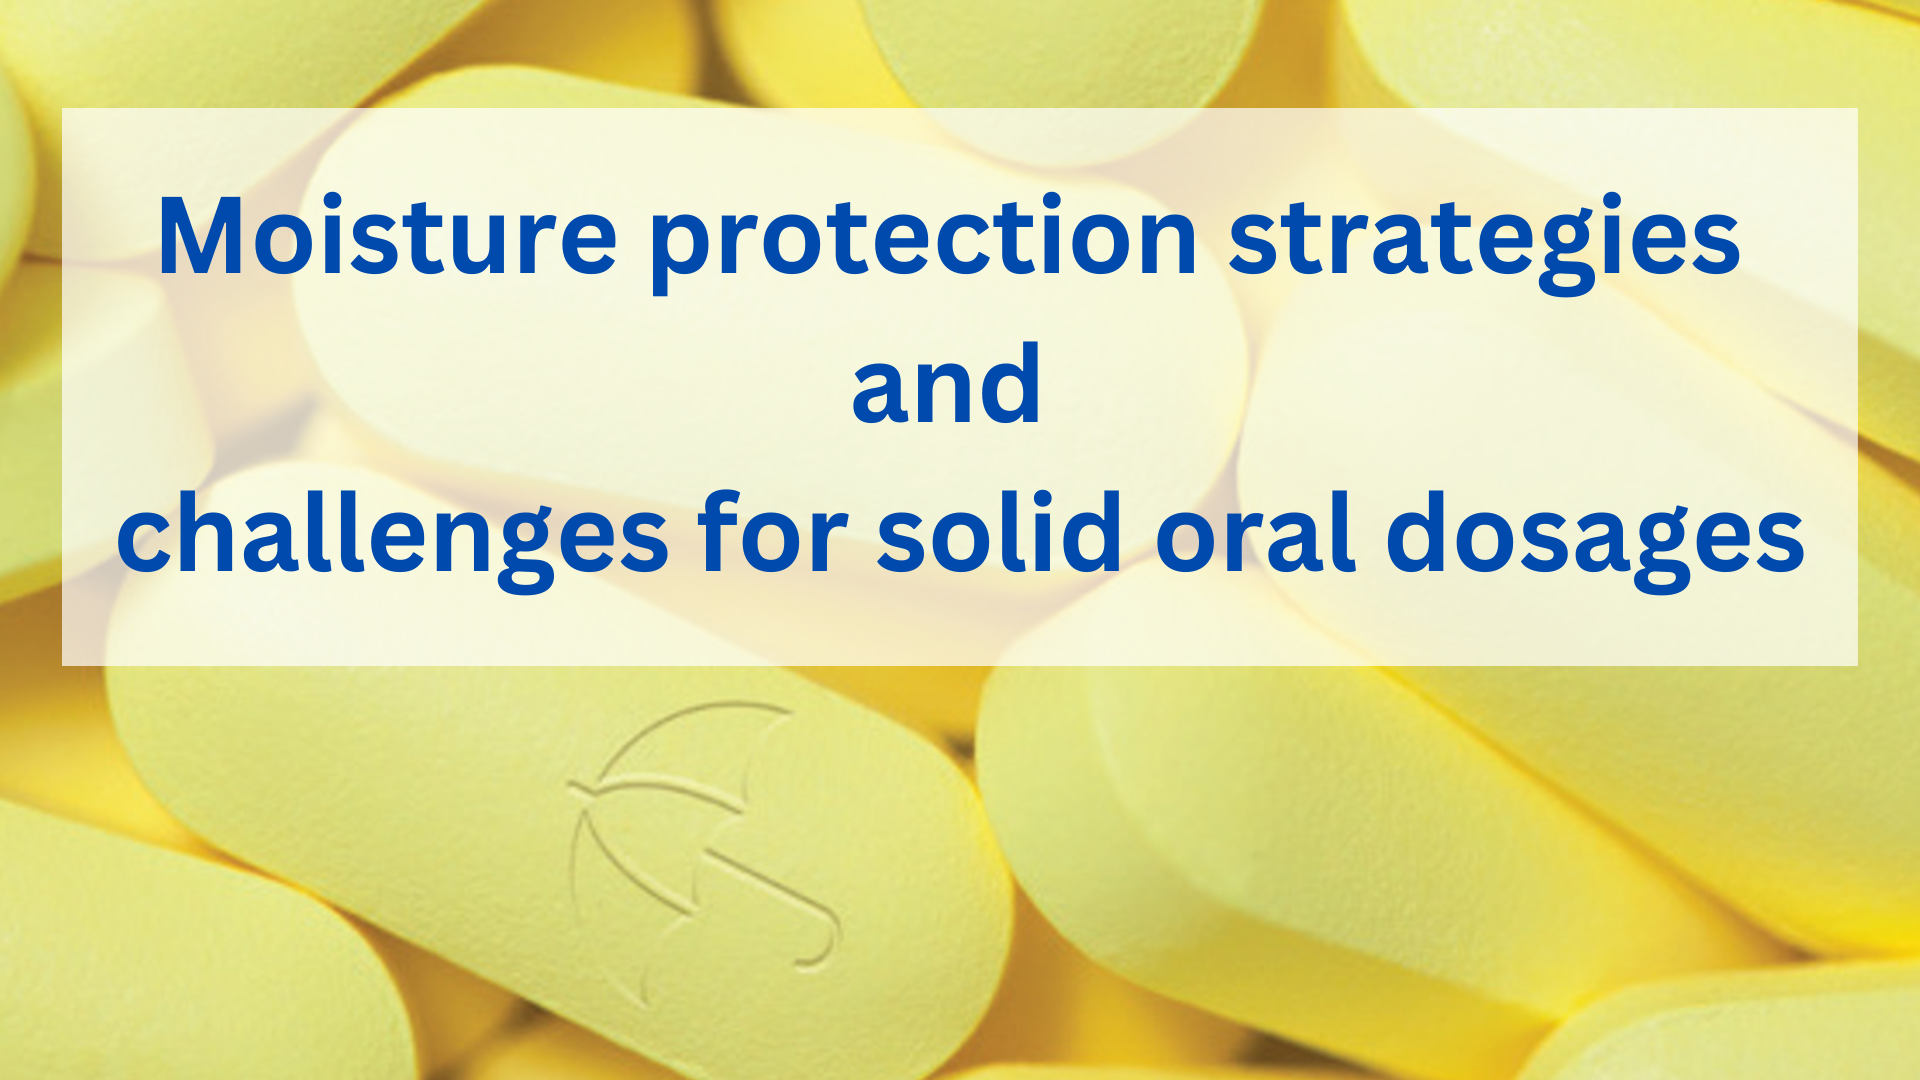 Moisture protection strategies and challenges for solid oral dosages